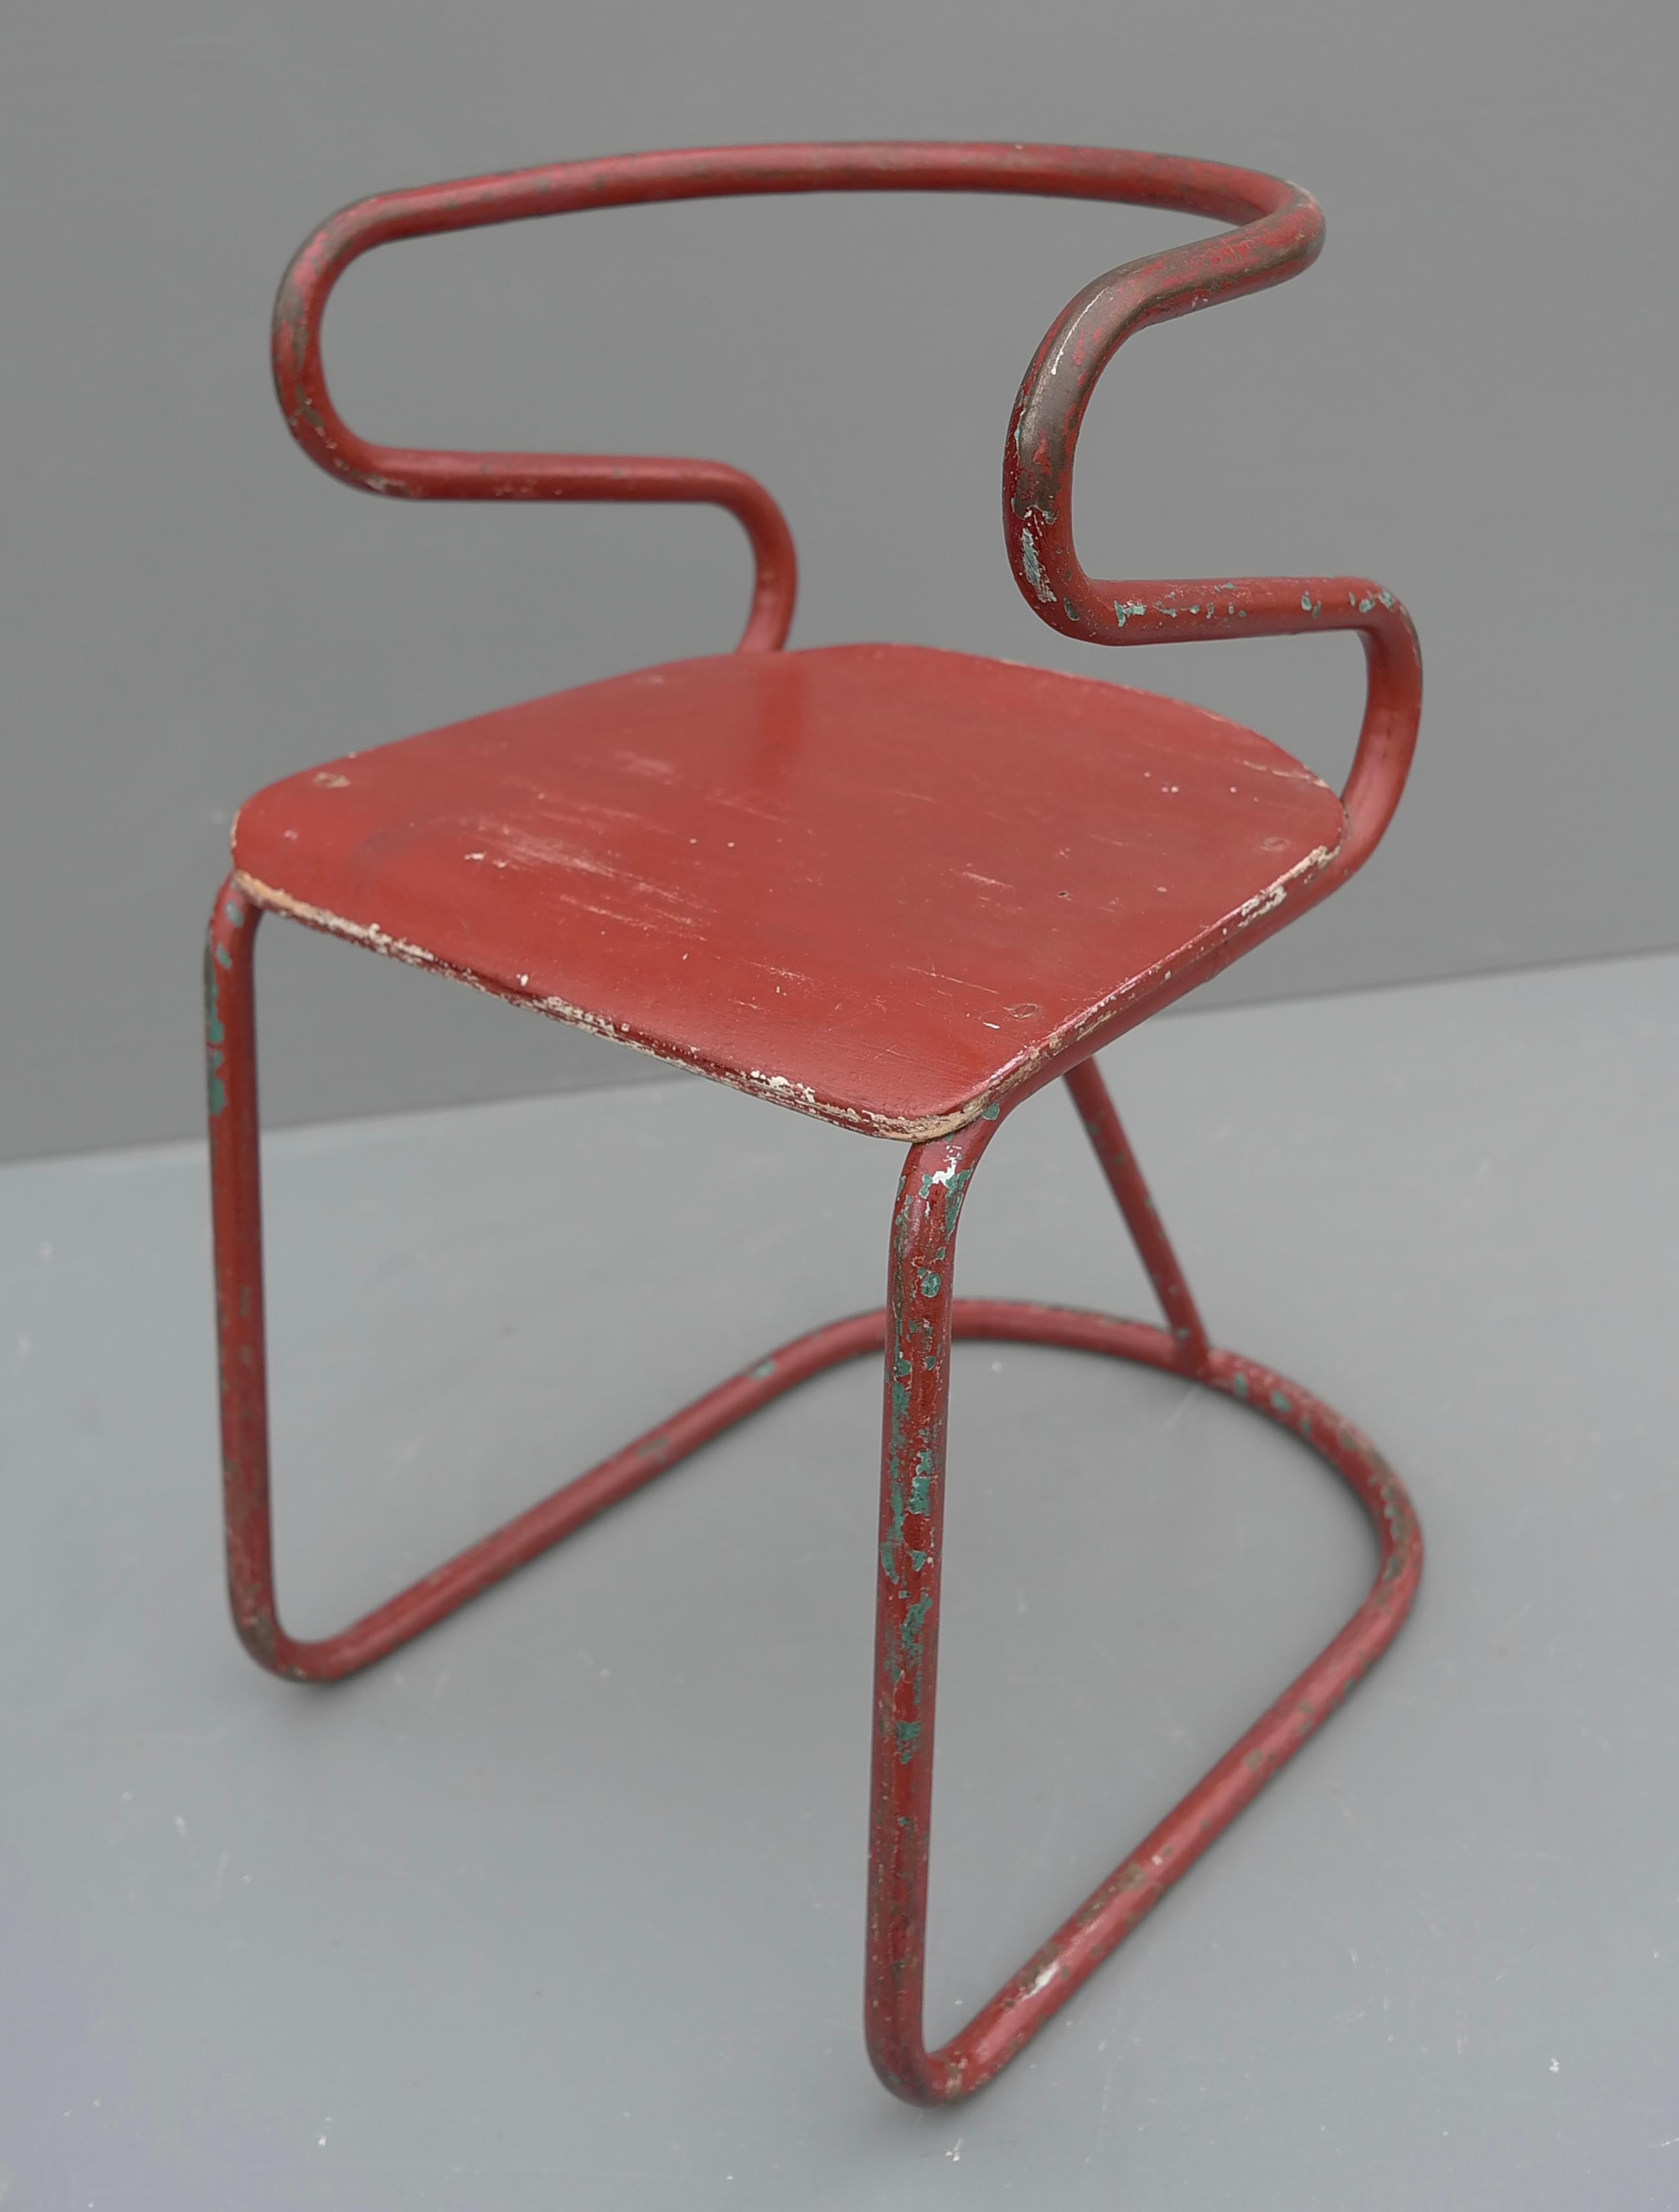 Red Sculptural Tubular steel and Wood Mid-Century Modern Children chair, 1950's

With lovely Patina and wear.